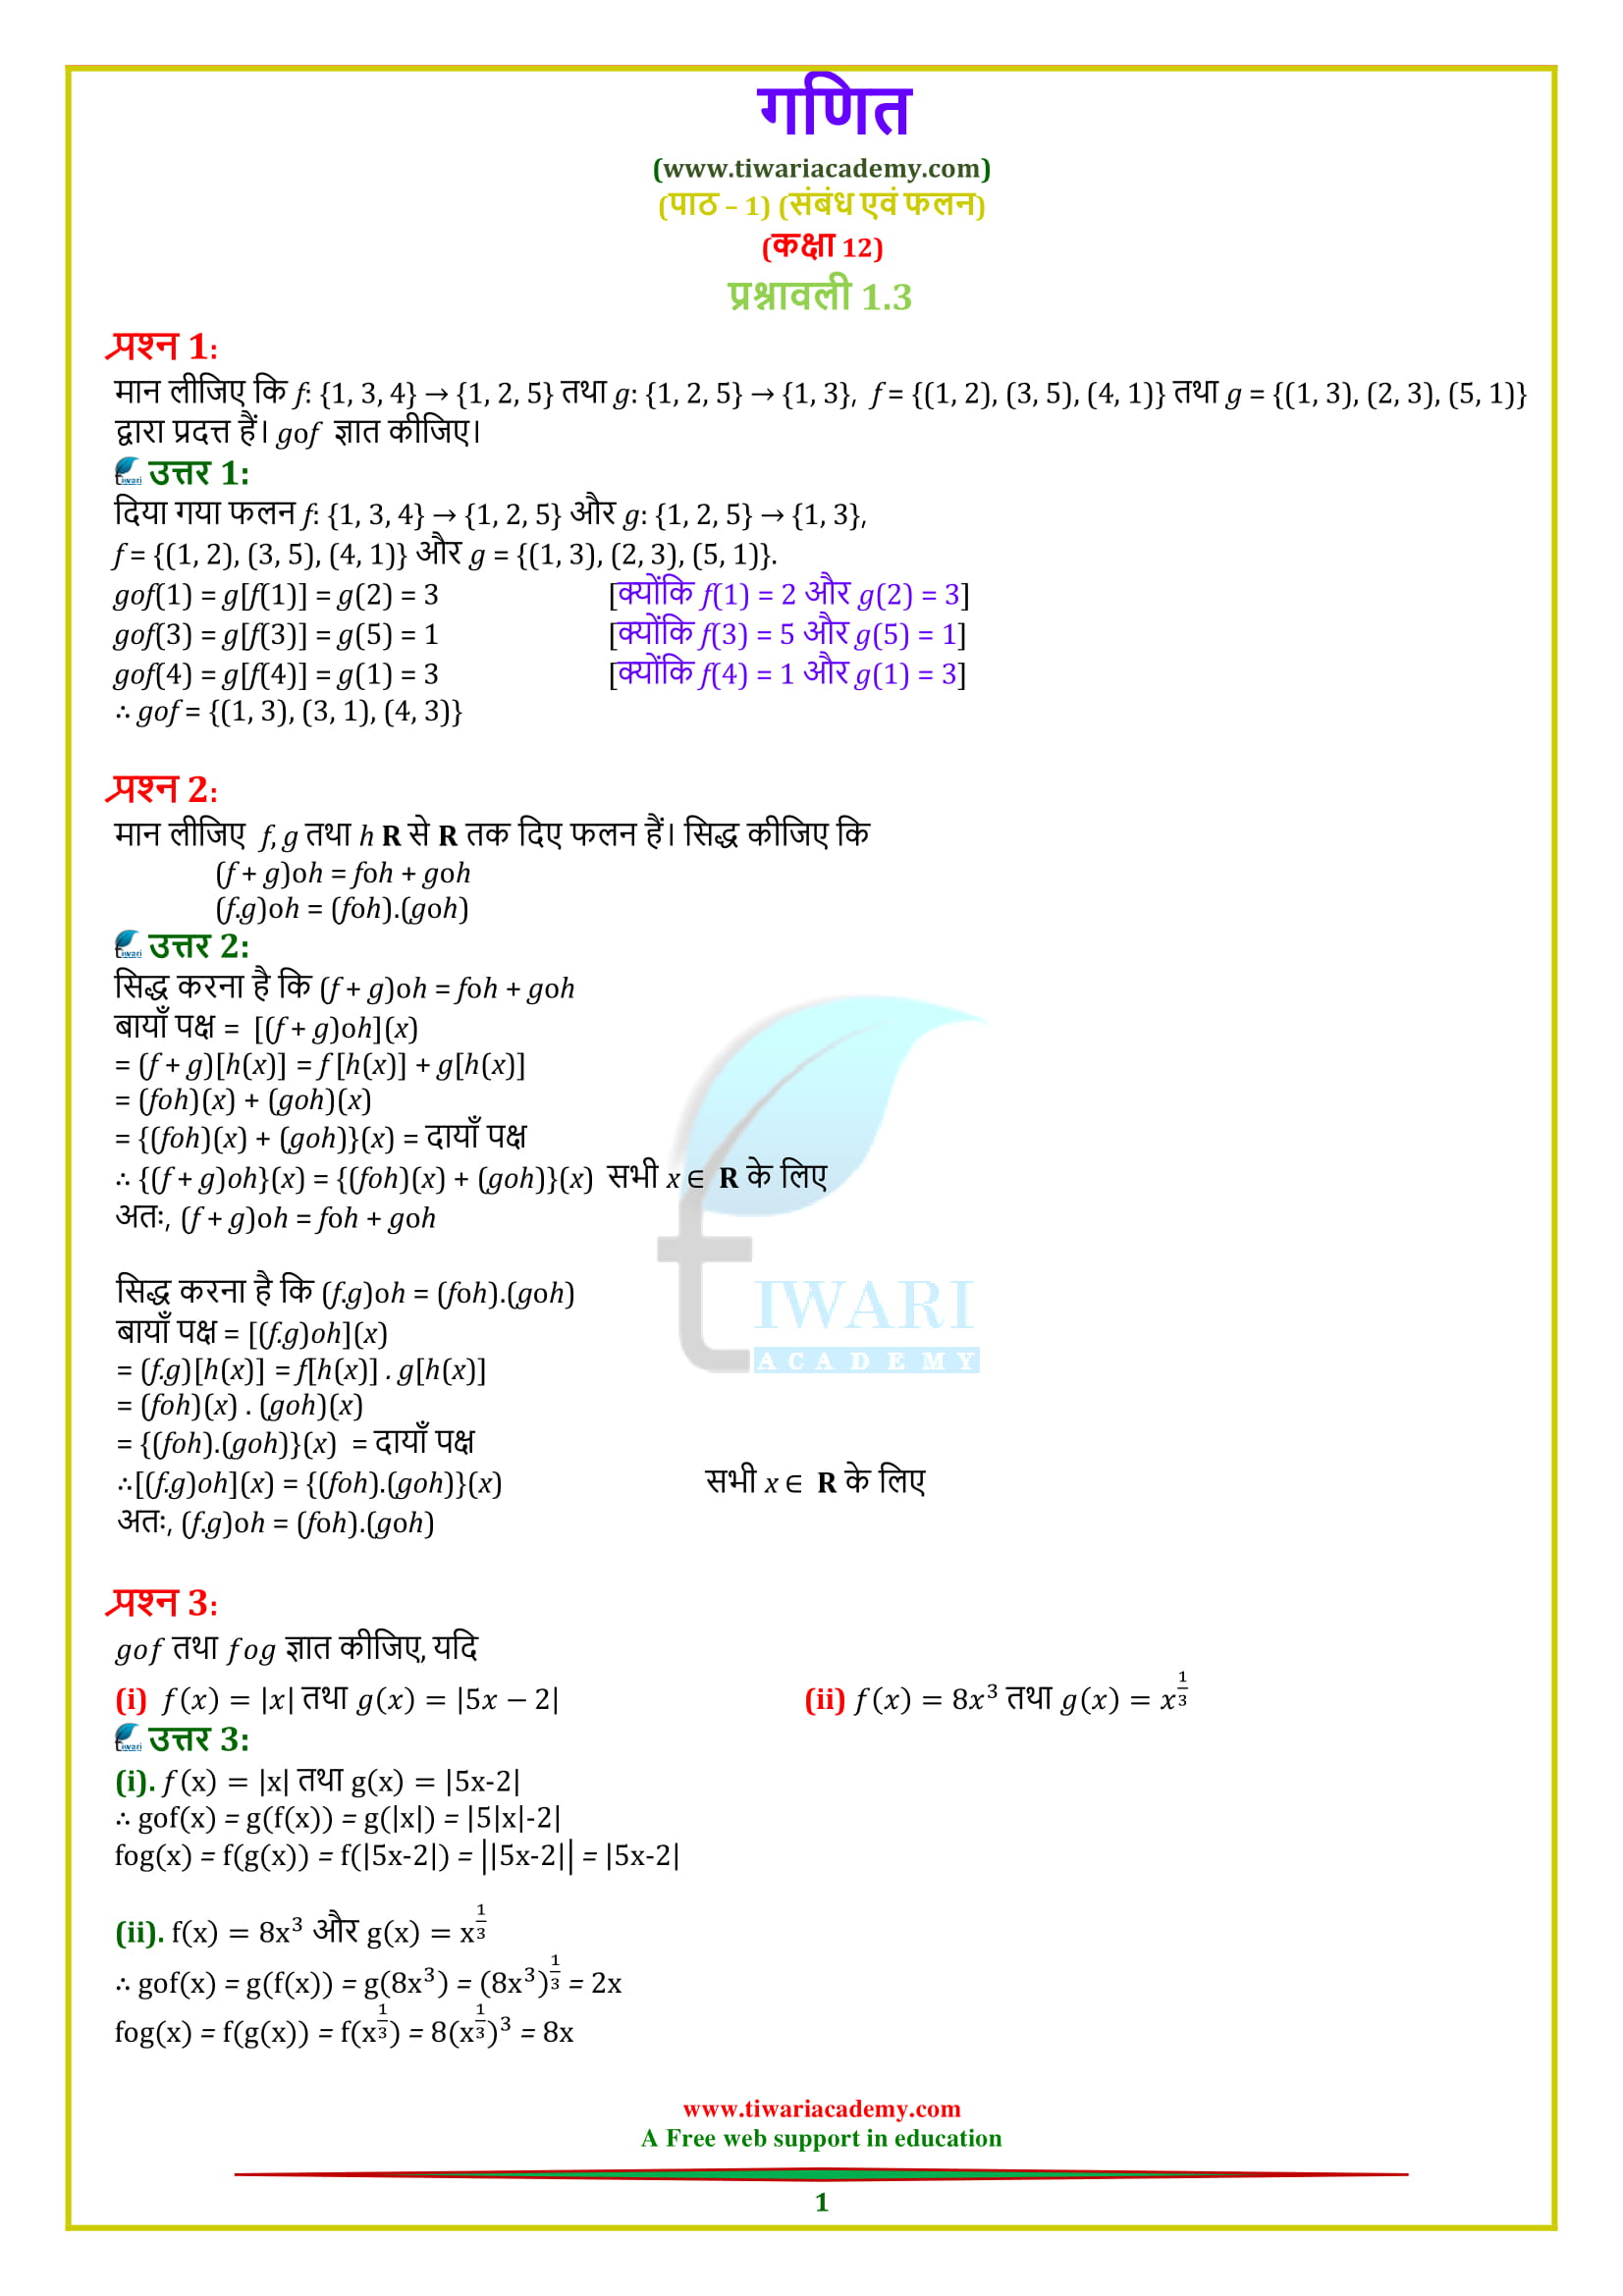 12 Maths Exercise 1.3 solutions in Hindi medium.